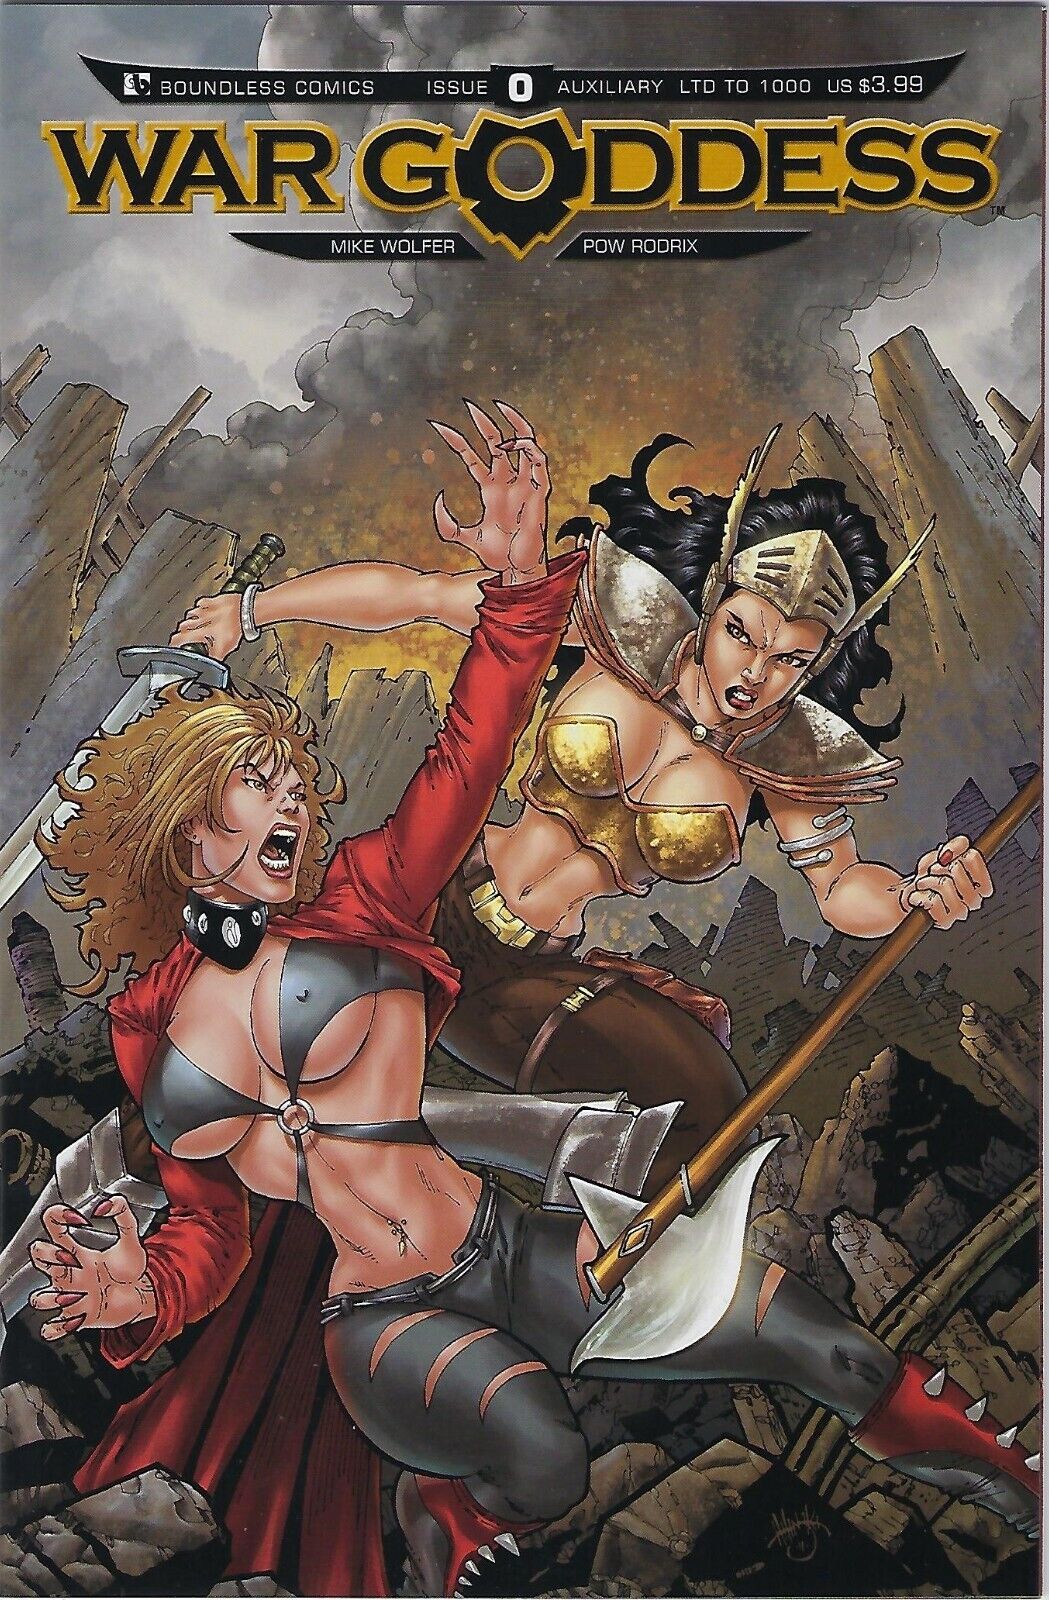 War Goddess # 0 Auxiliary Edition Limited to 1000 Variant Cover   NM